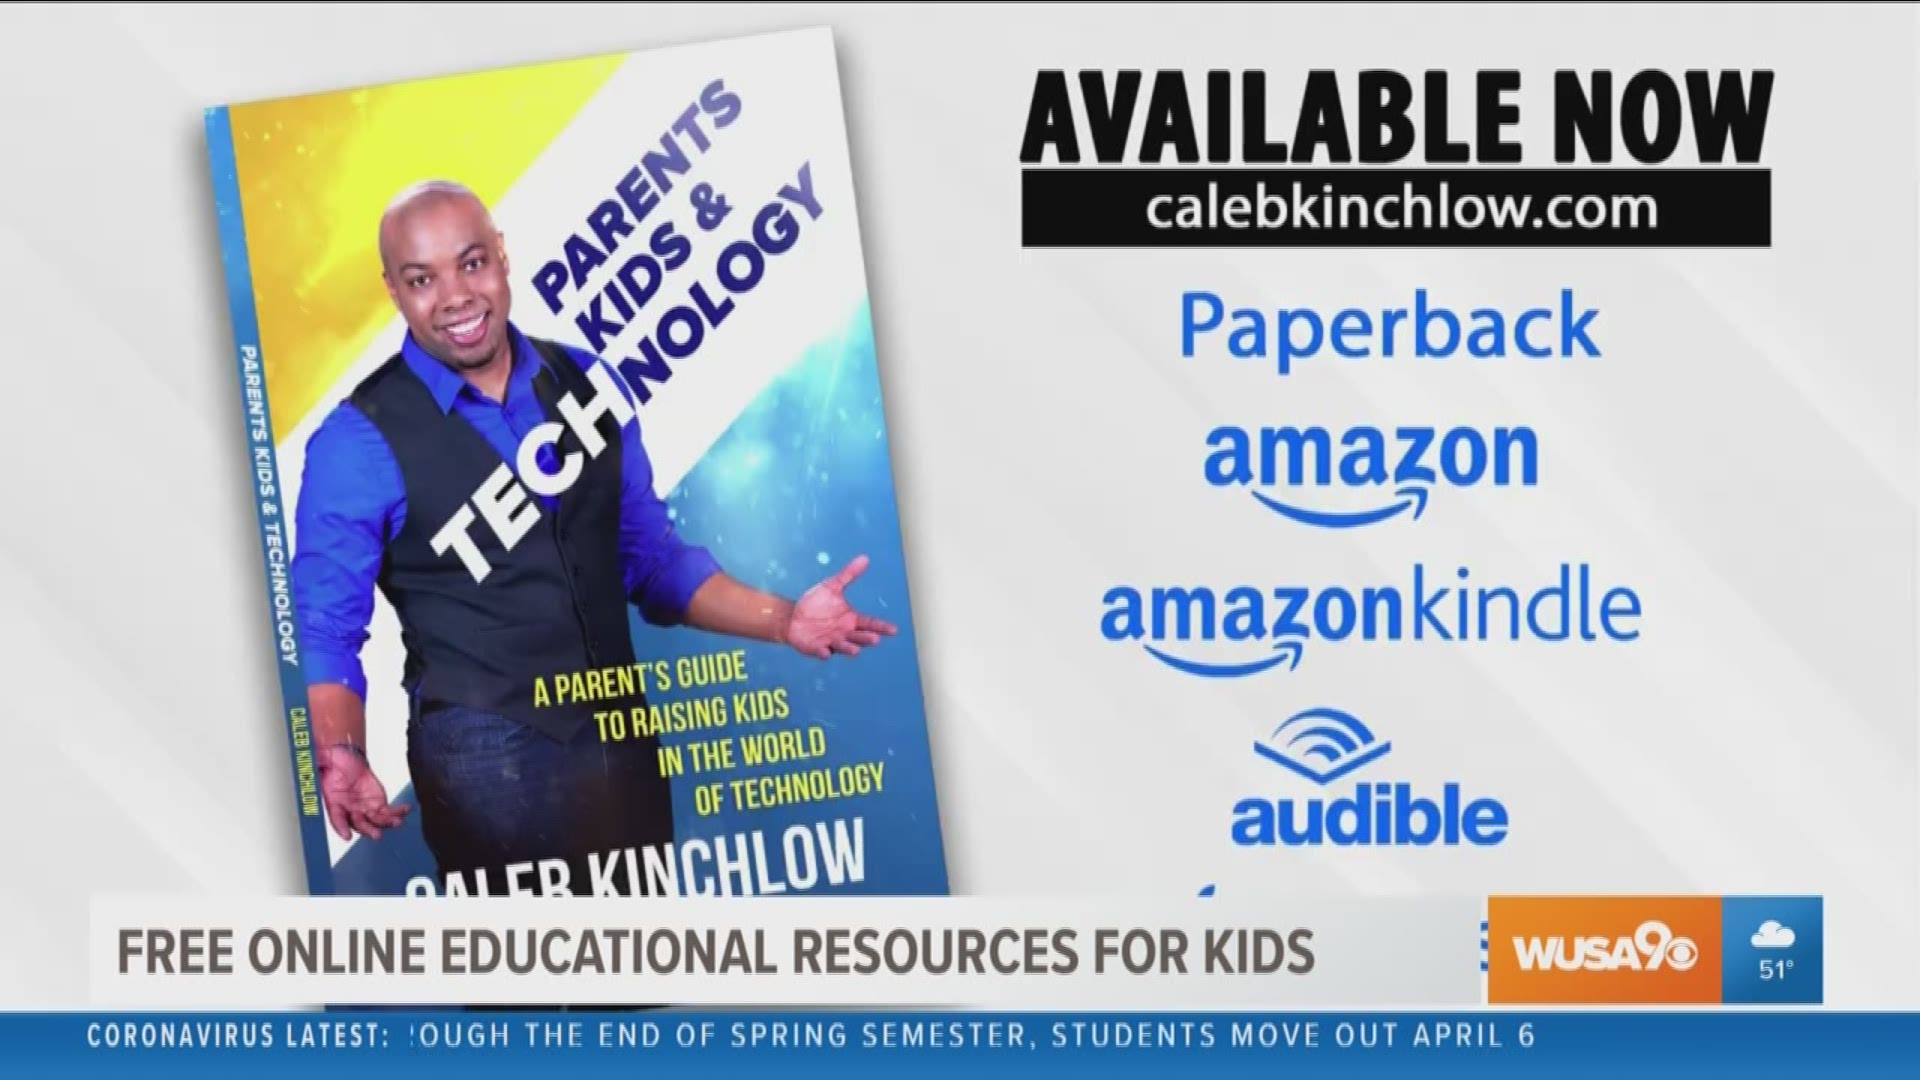 Parent Technology Advocate, Caleb Kinchlow, shows us how to keep kids learning and occupied with these 3 free online educational resources.